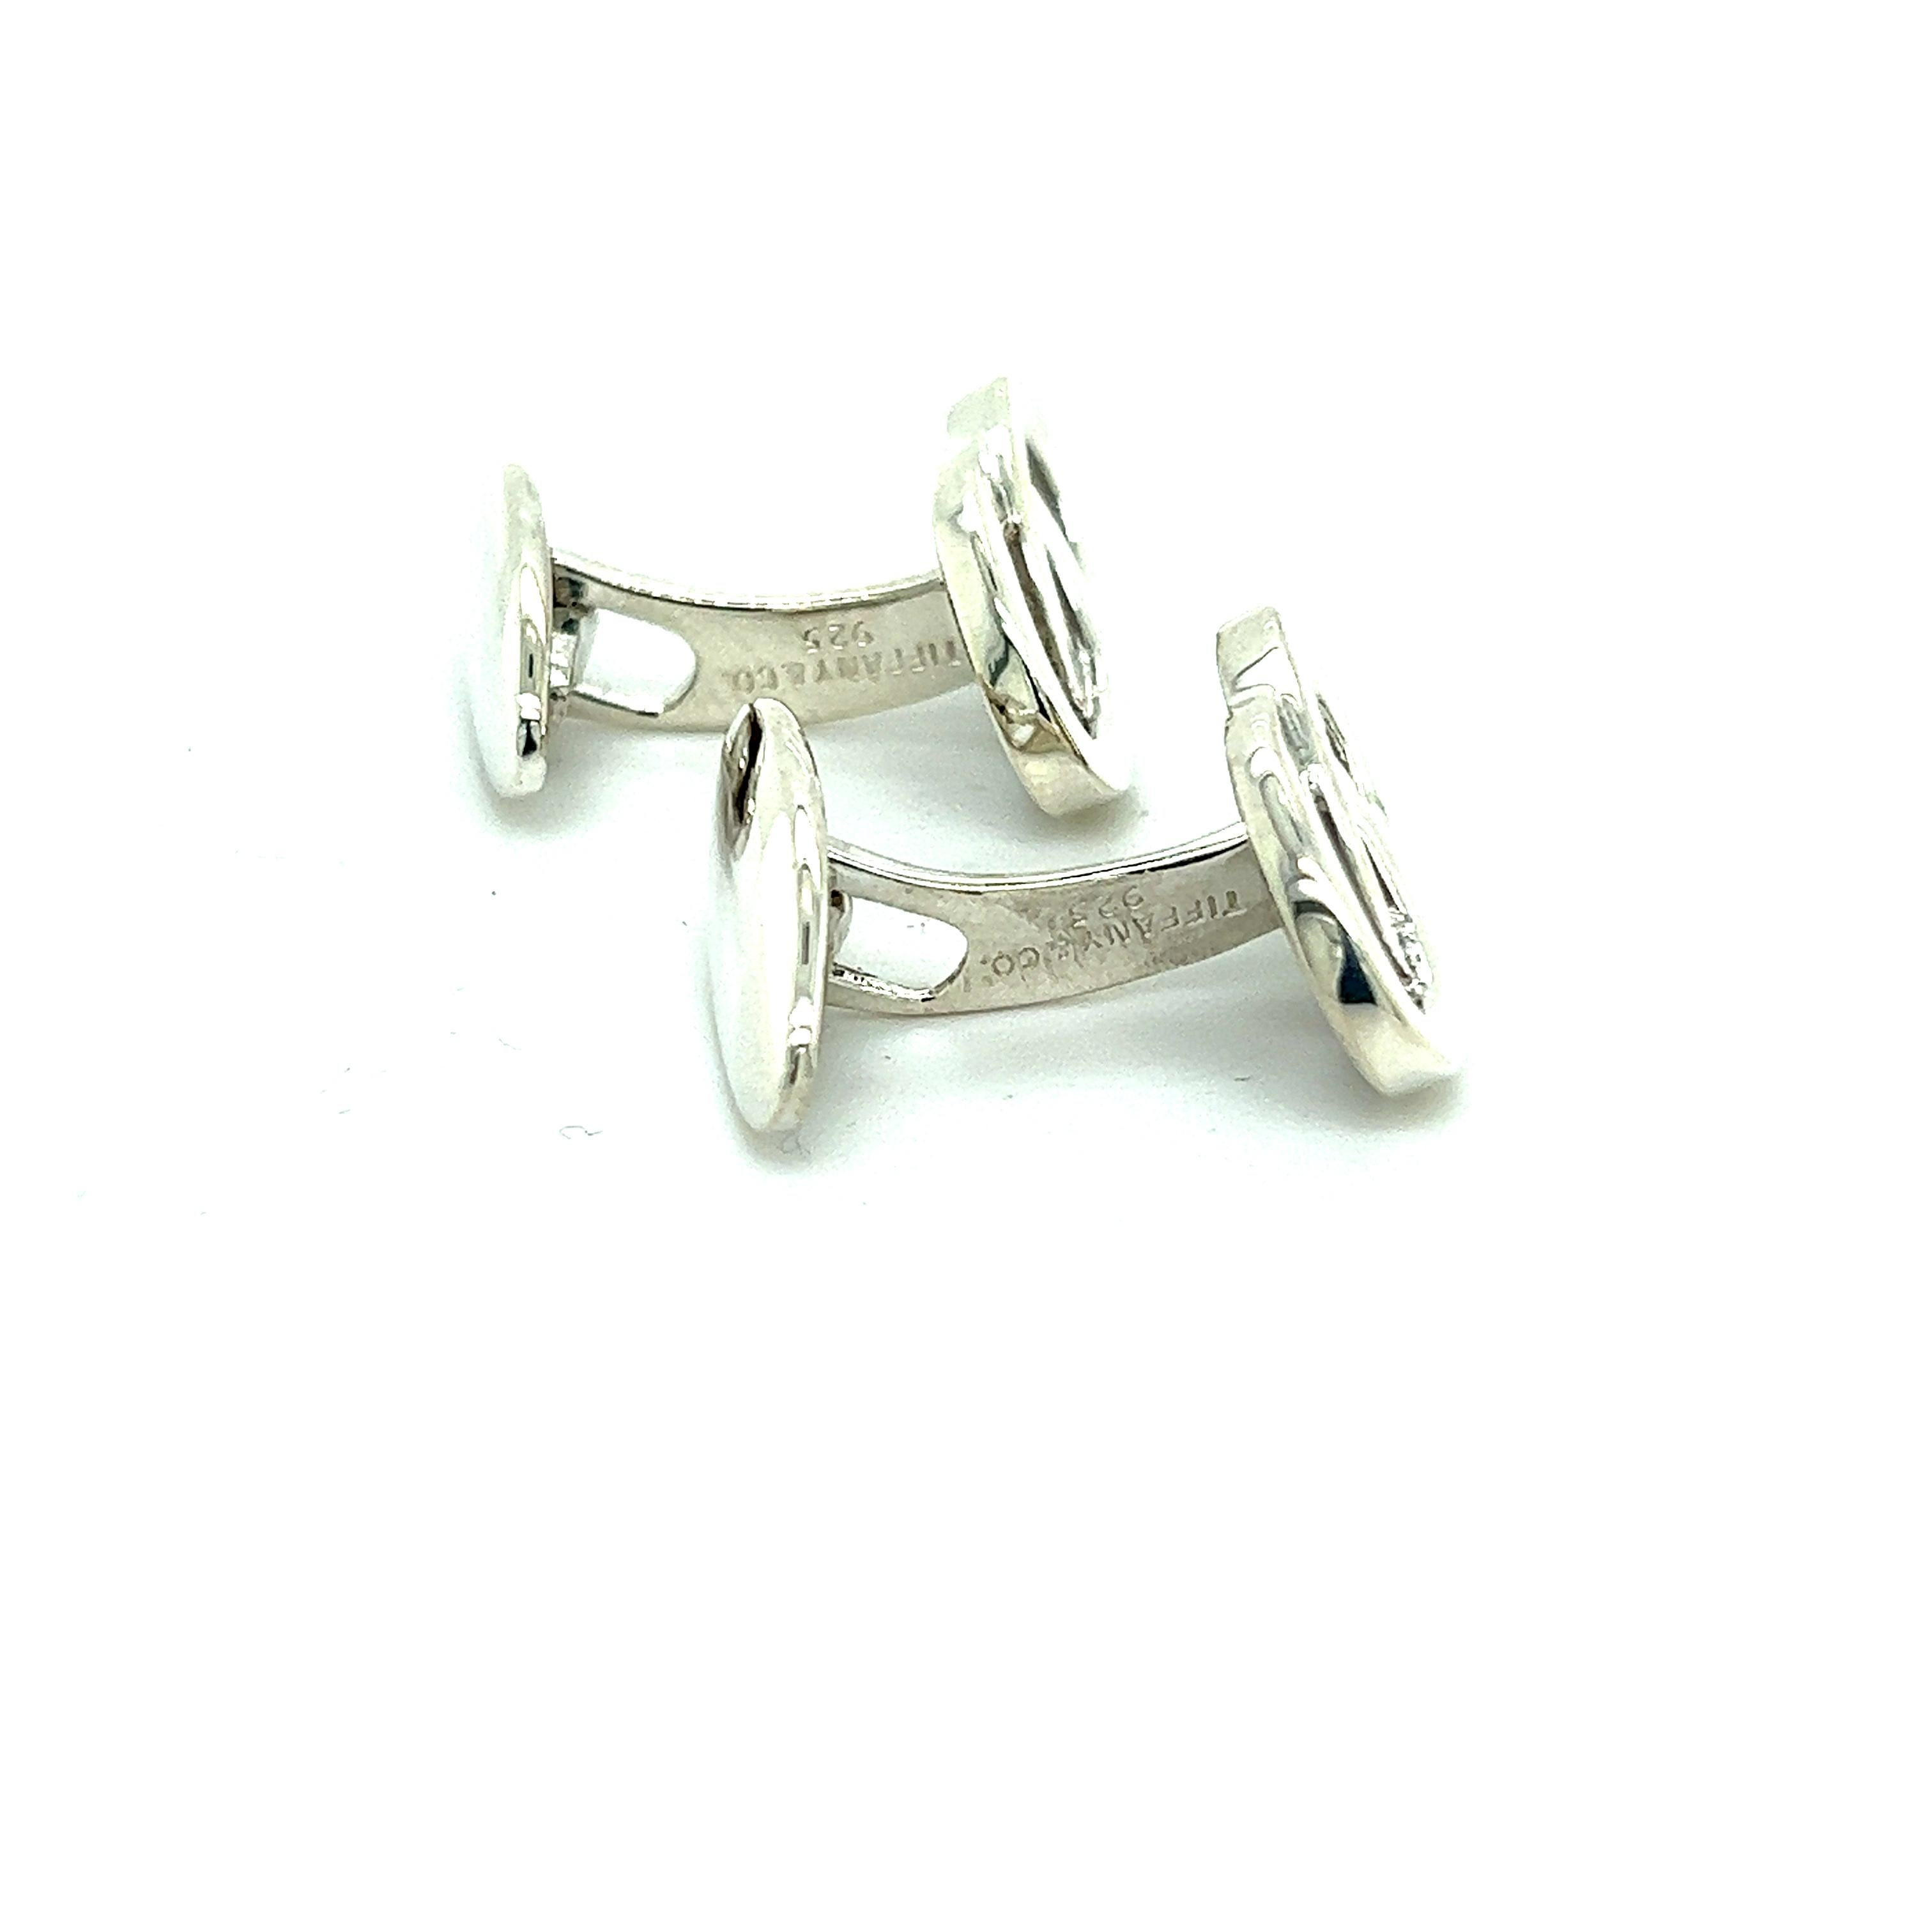 Tiffany & Co Estate Cufflinks Sterling Silver In Good Condition For Sale In Brooklyn, NY